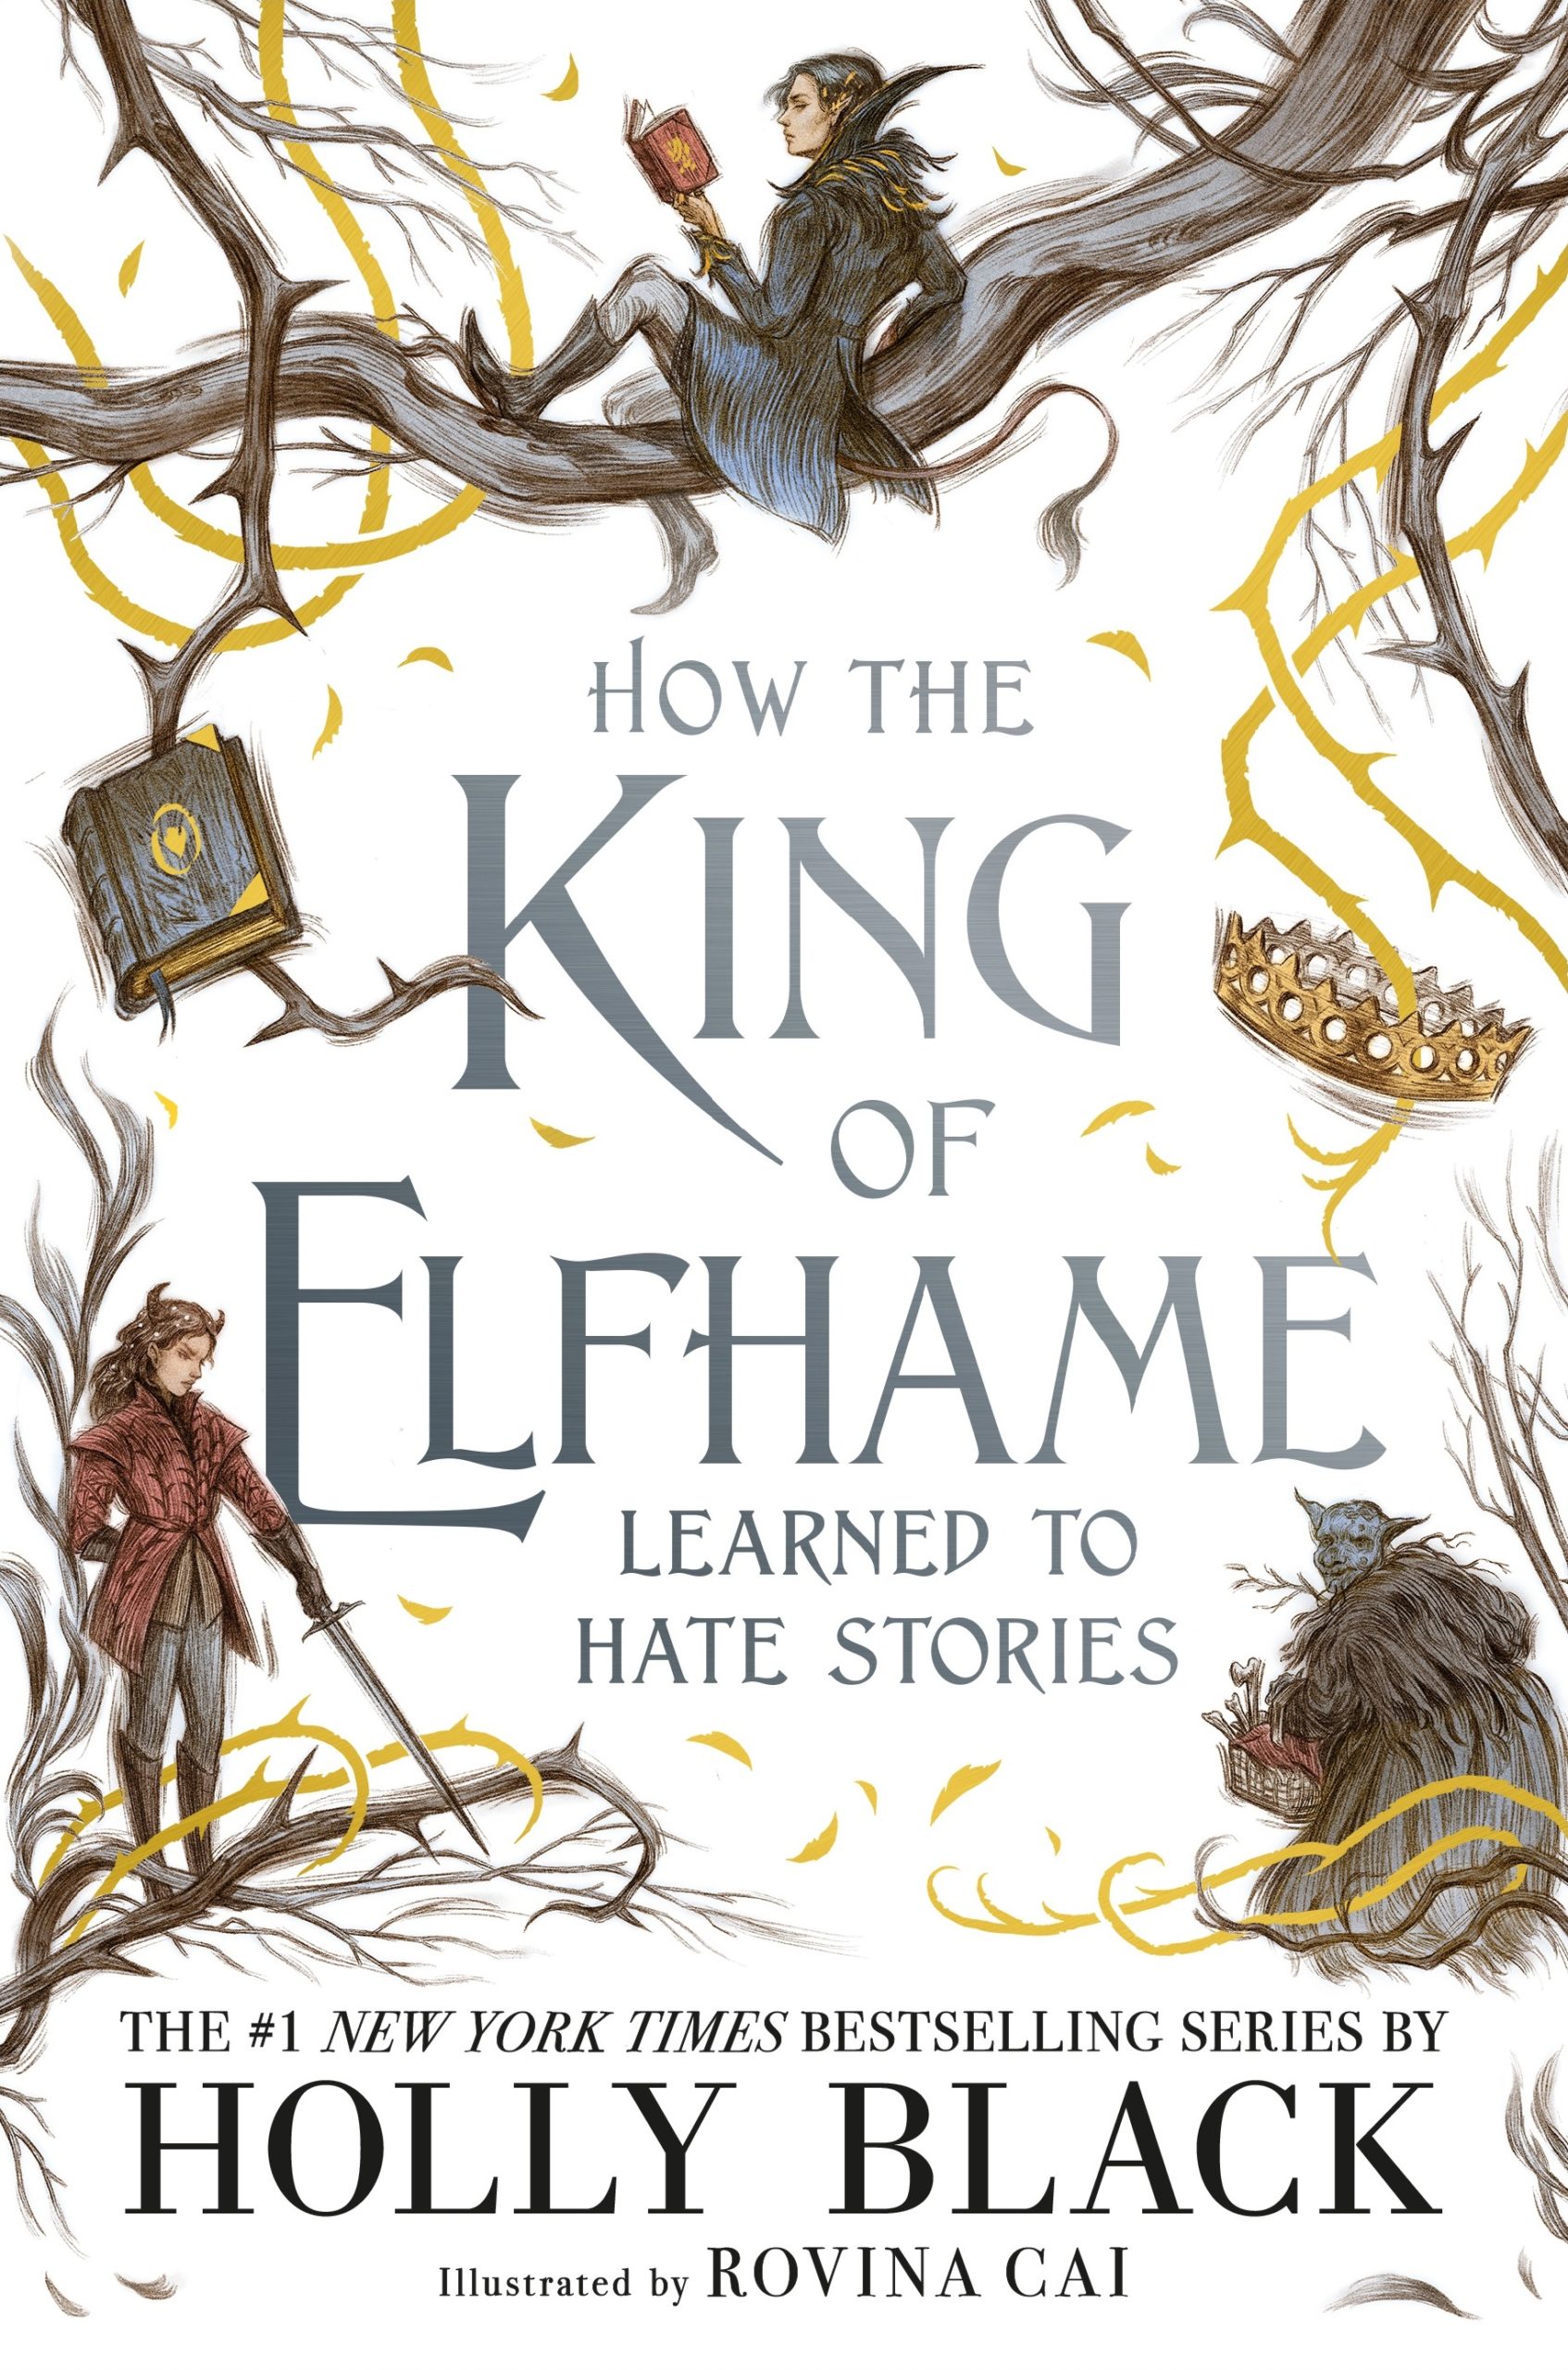 How the King of Elfhame Learned to Hate Stories by Holly Black, art by Rovina Cai